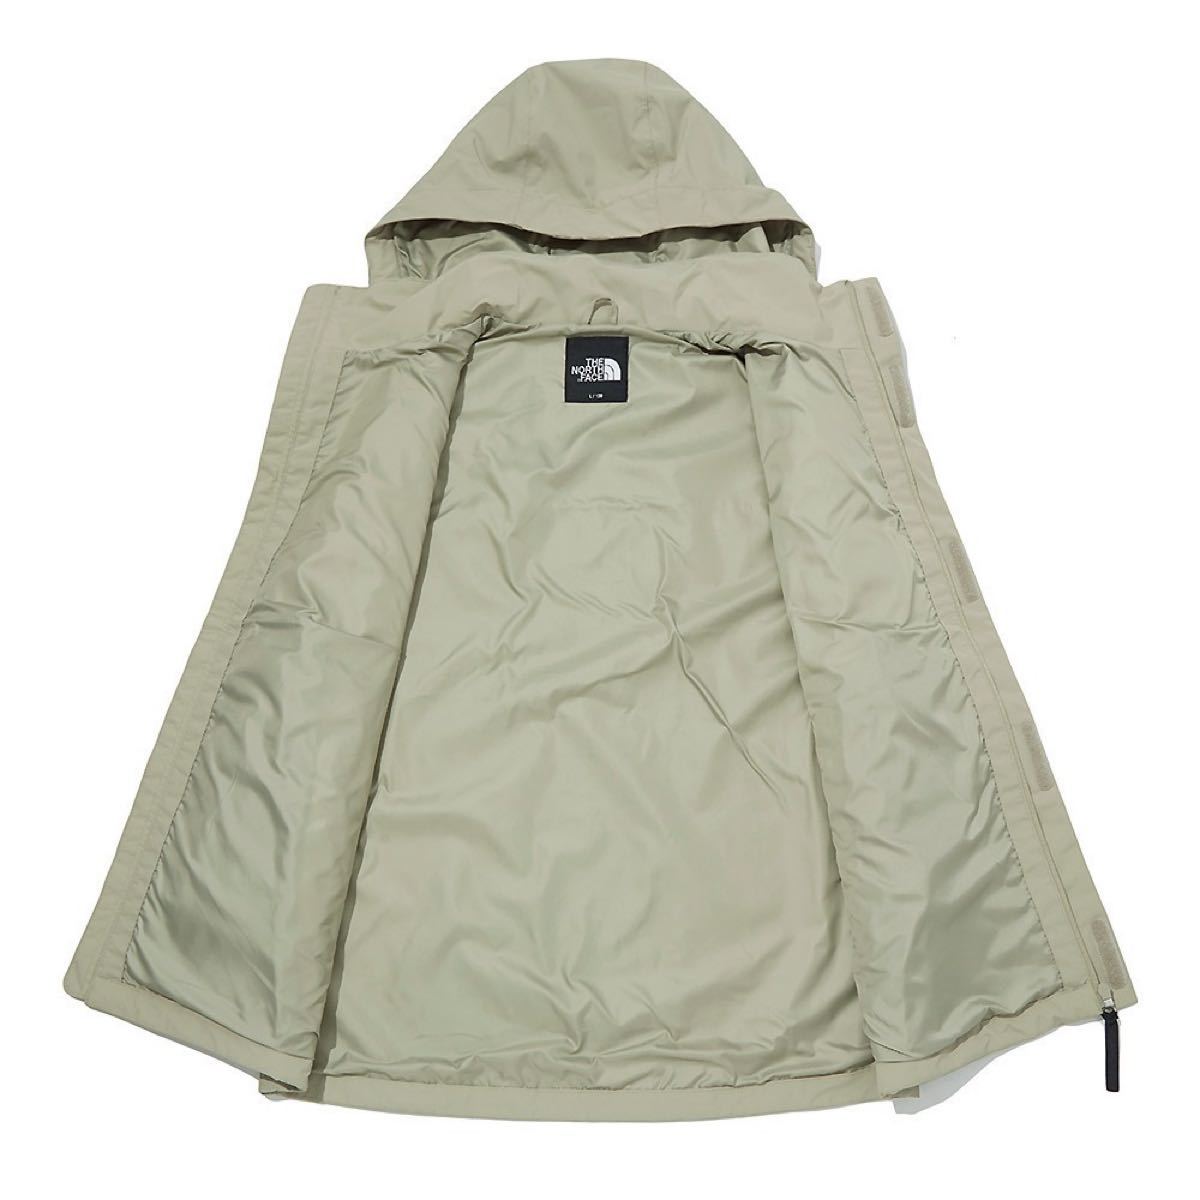 ★THE NORTH FACE★ノースフェイスNEW MOUNTAIN JACKET EX